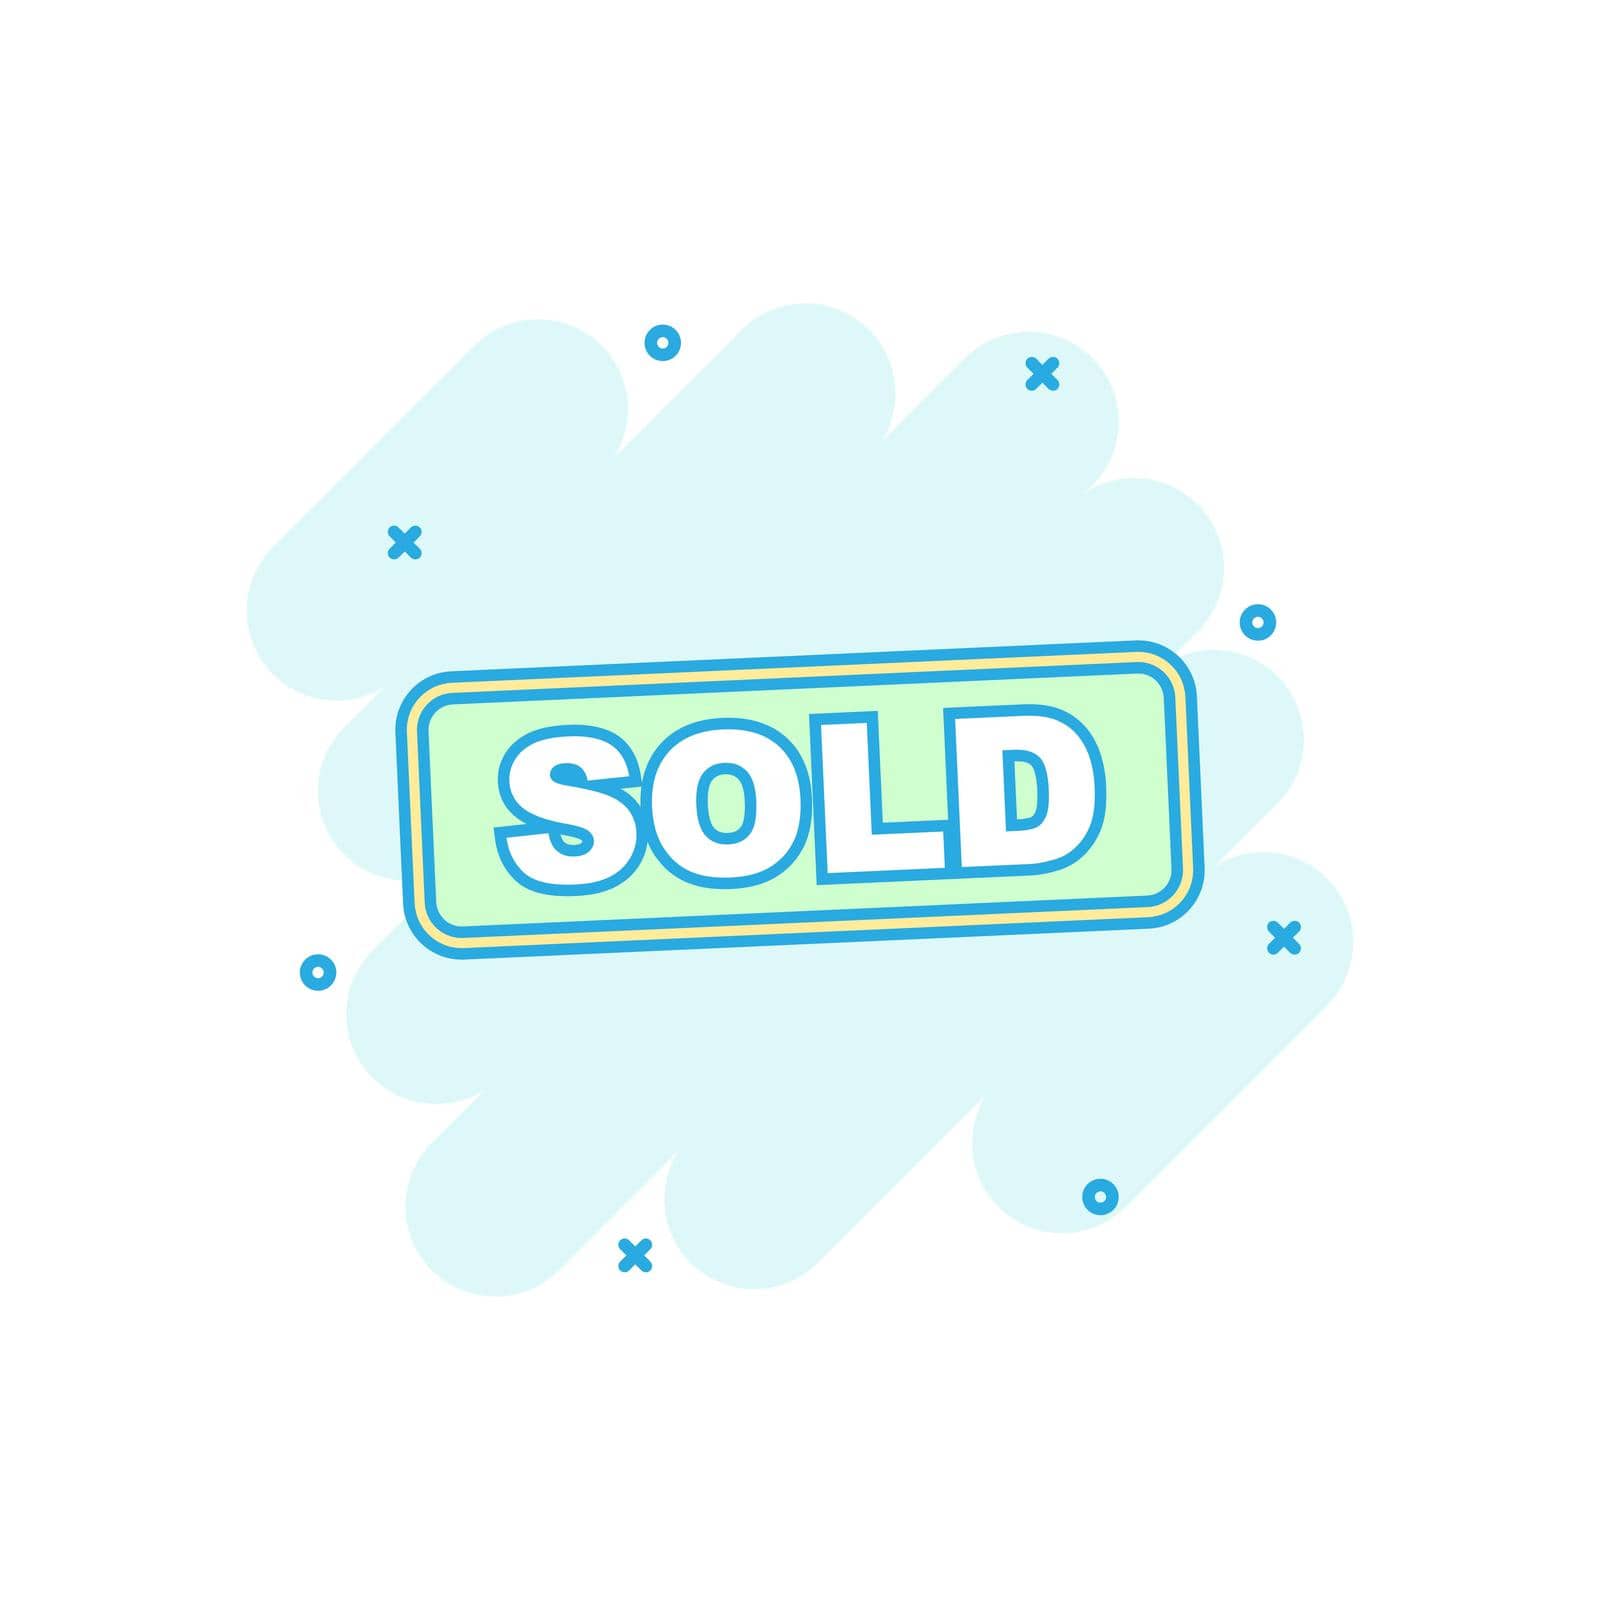 Cartoon colored SOLD stamp icon in comic style. Sale tag illustration pictogram. Market sell sign splash business concept.